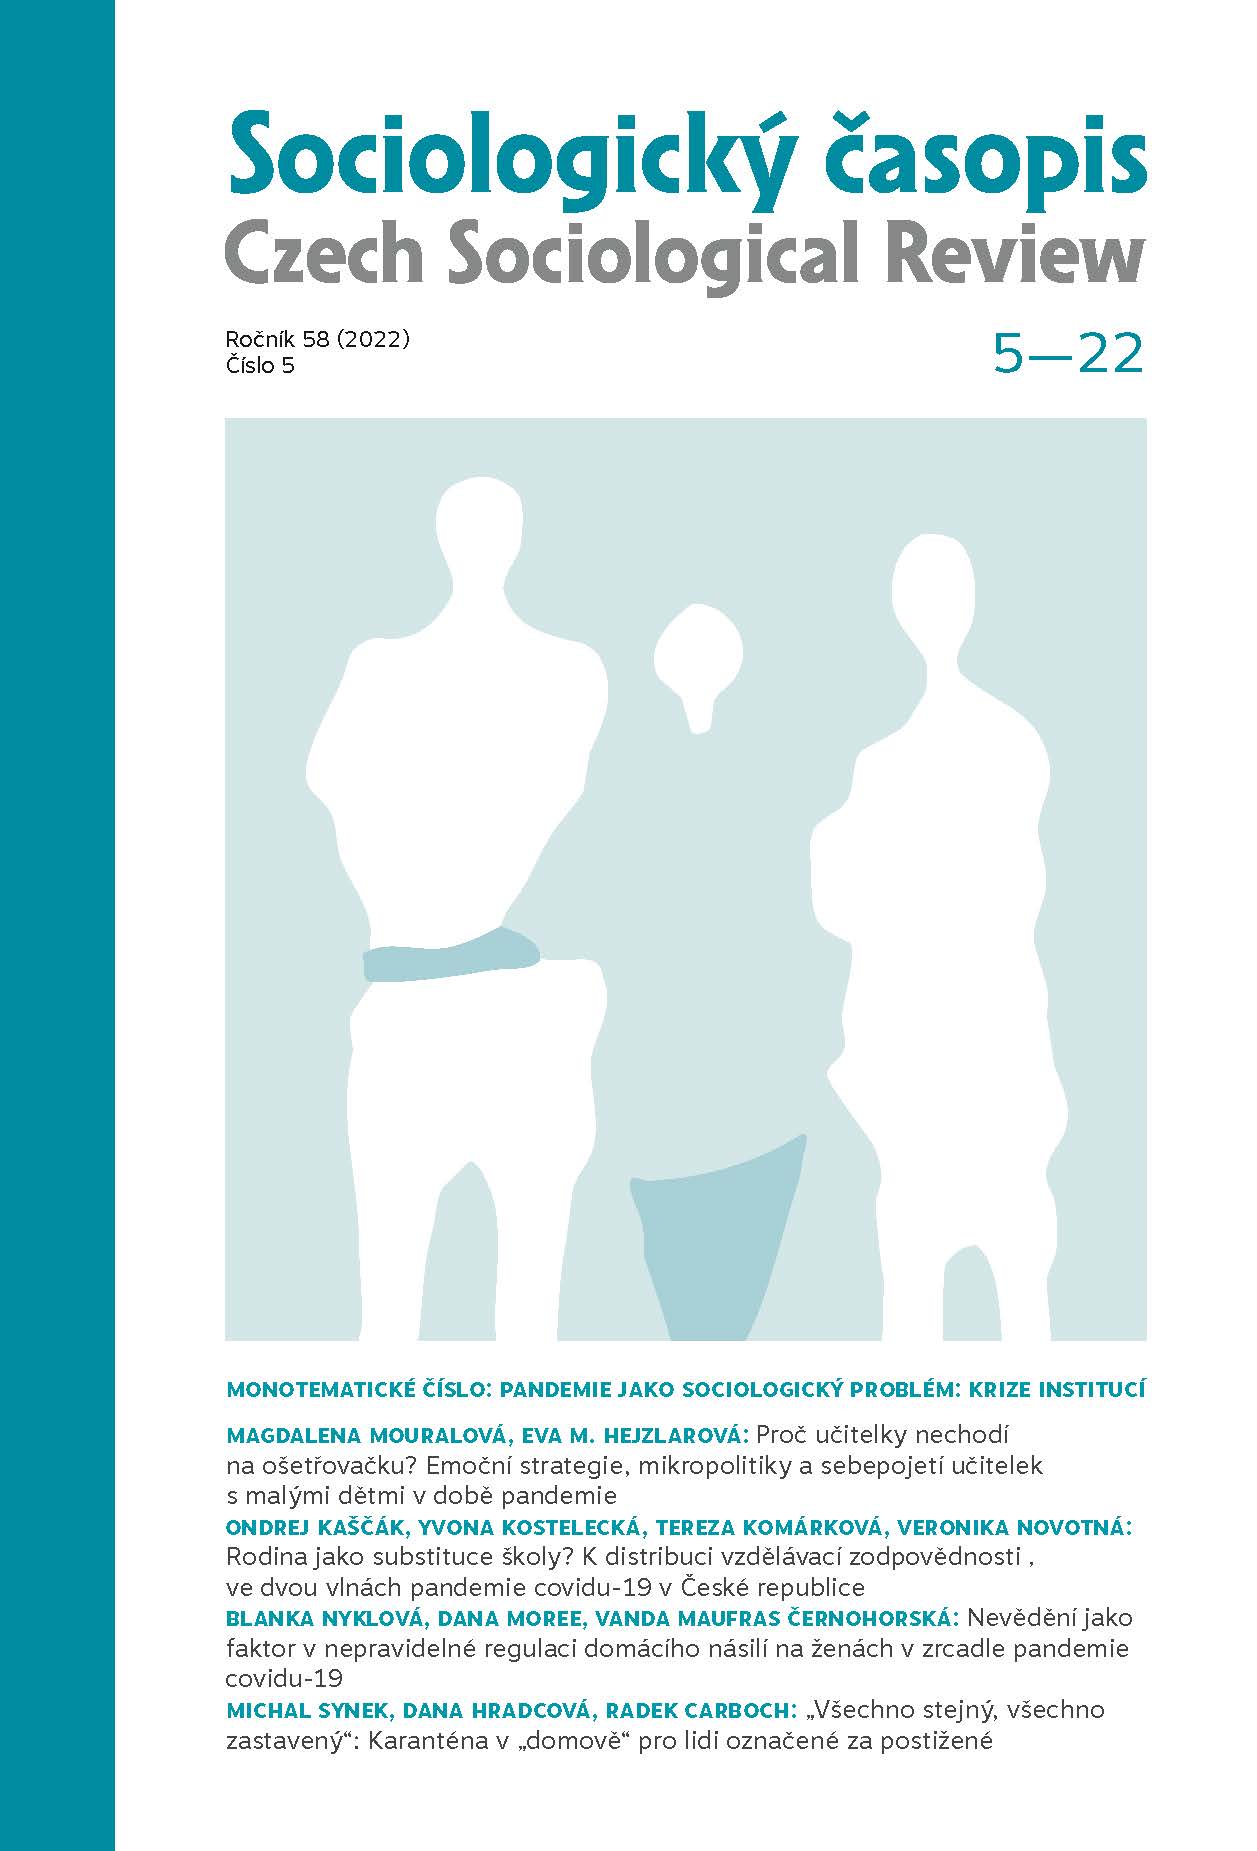 Family as a Substitute for School? The Distribution of Educational Responsibilities during Two Waves of the COVID-19 Pandemic in the Czech Republic Cover Image